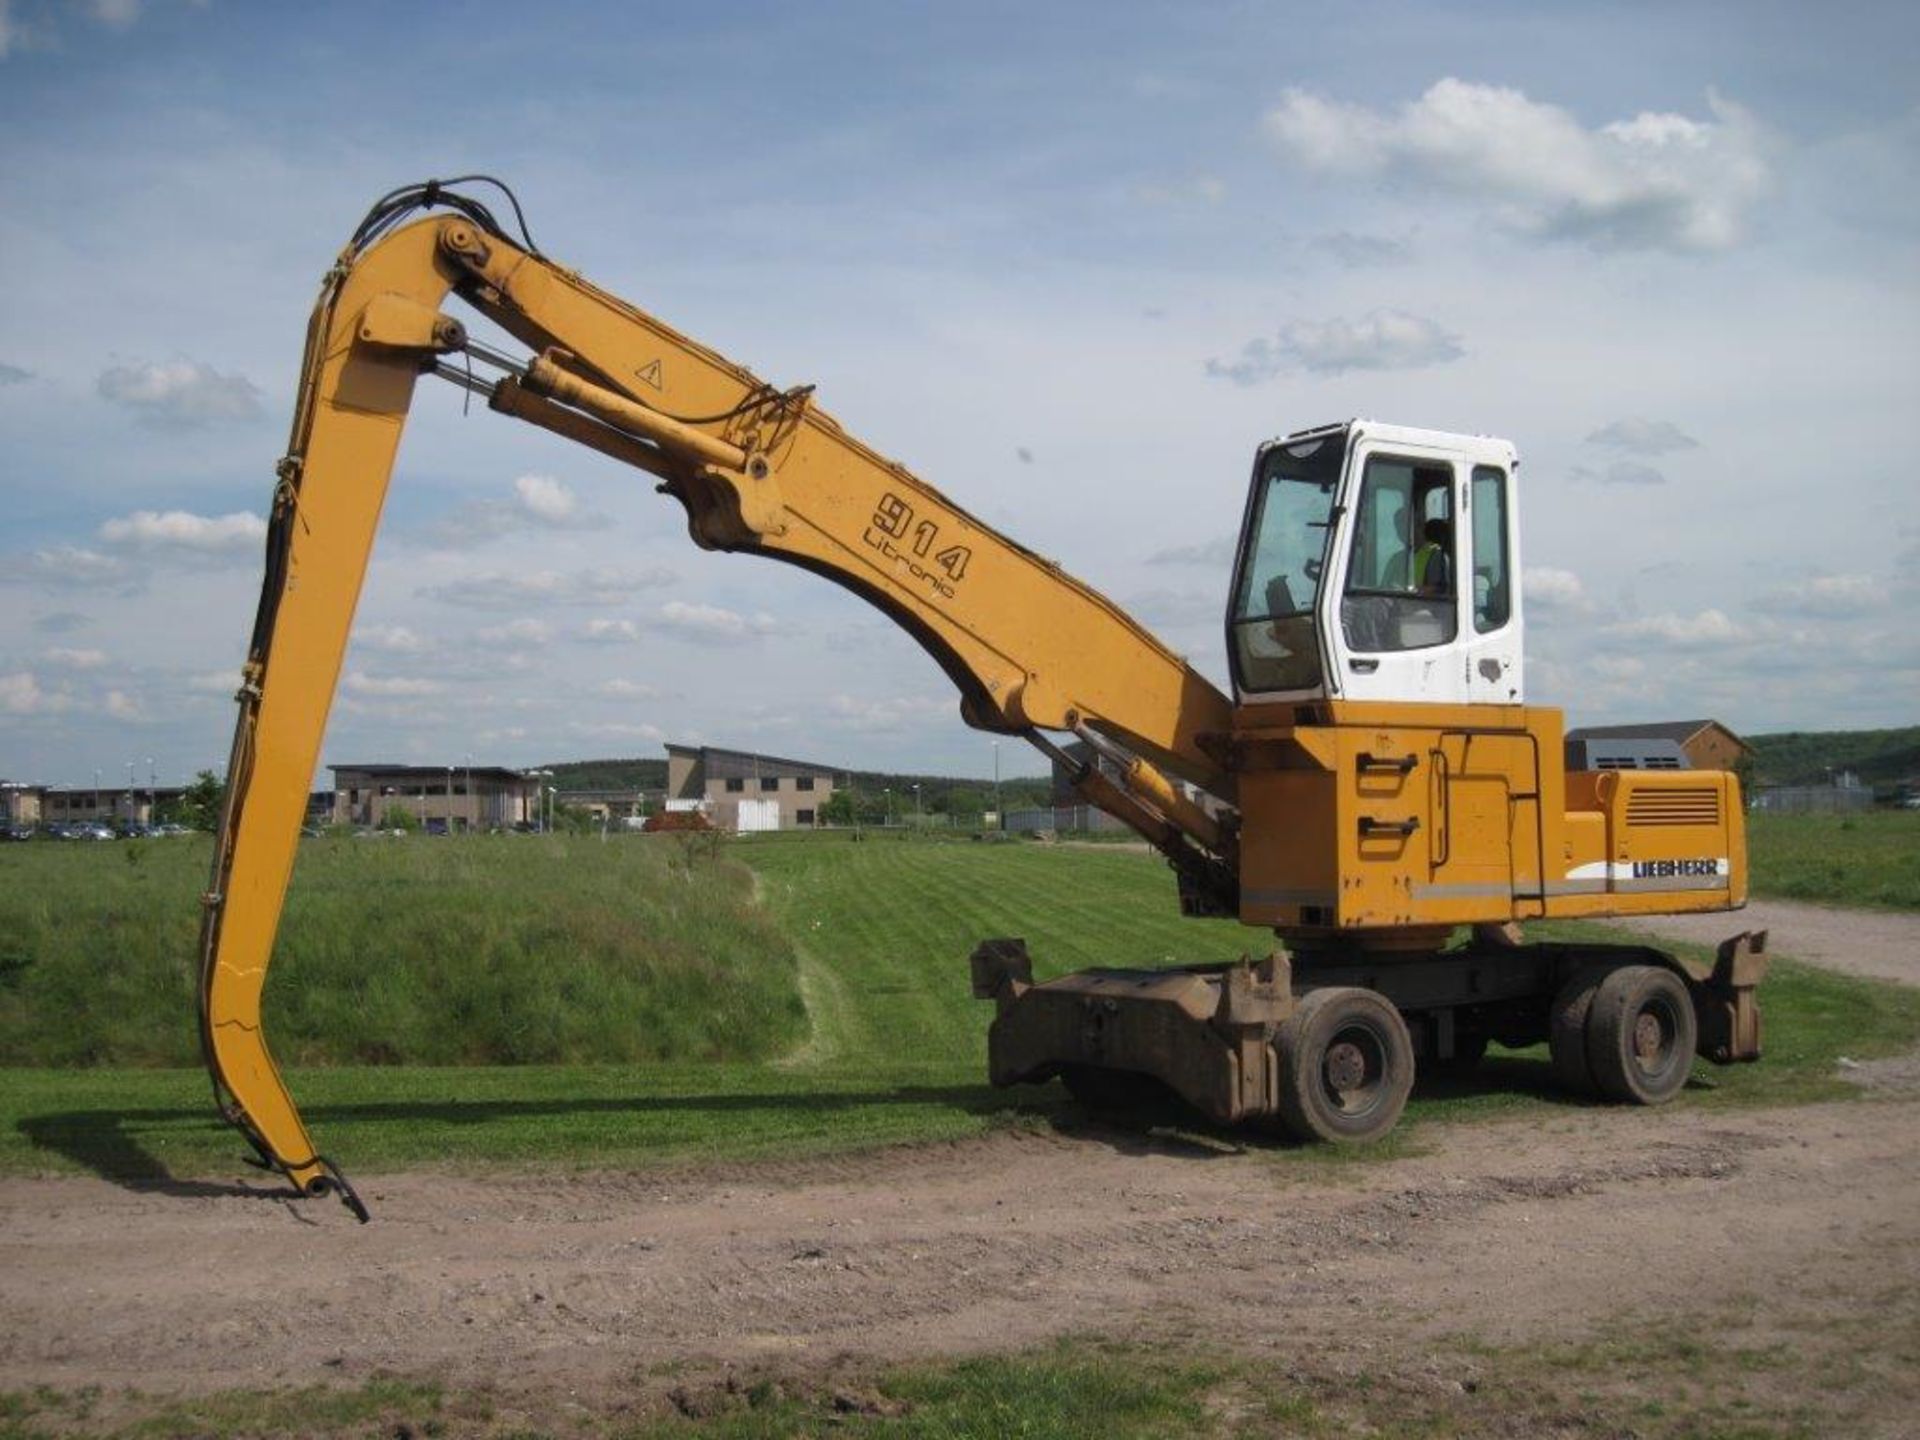 Liebherr 914 Rehandler on Wheels
2003
Very good condition, high cab, solid wheels and long reach - Image 3 of 4